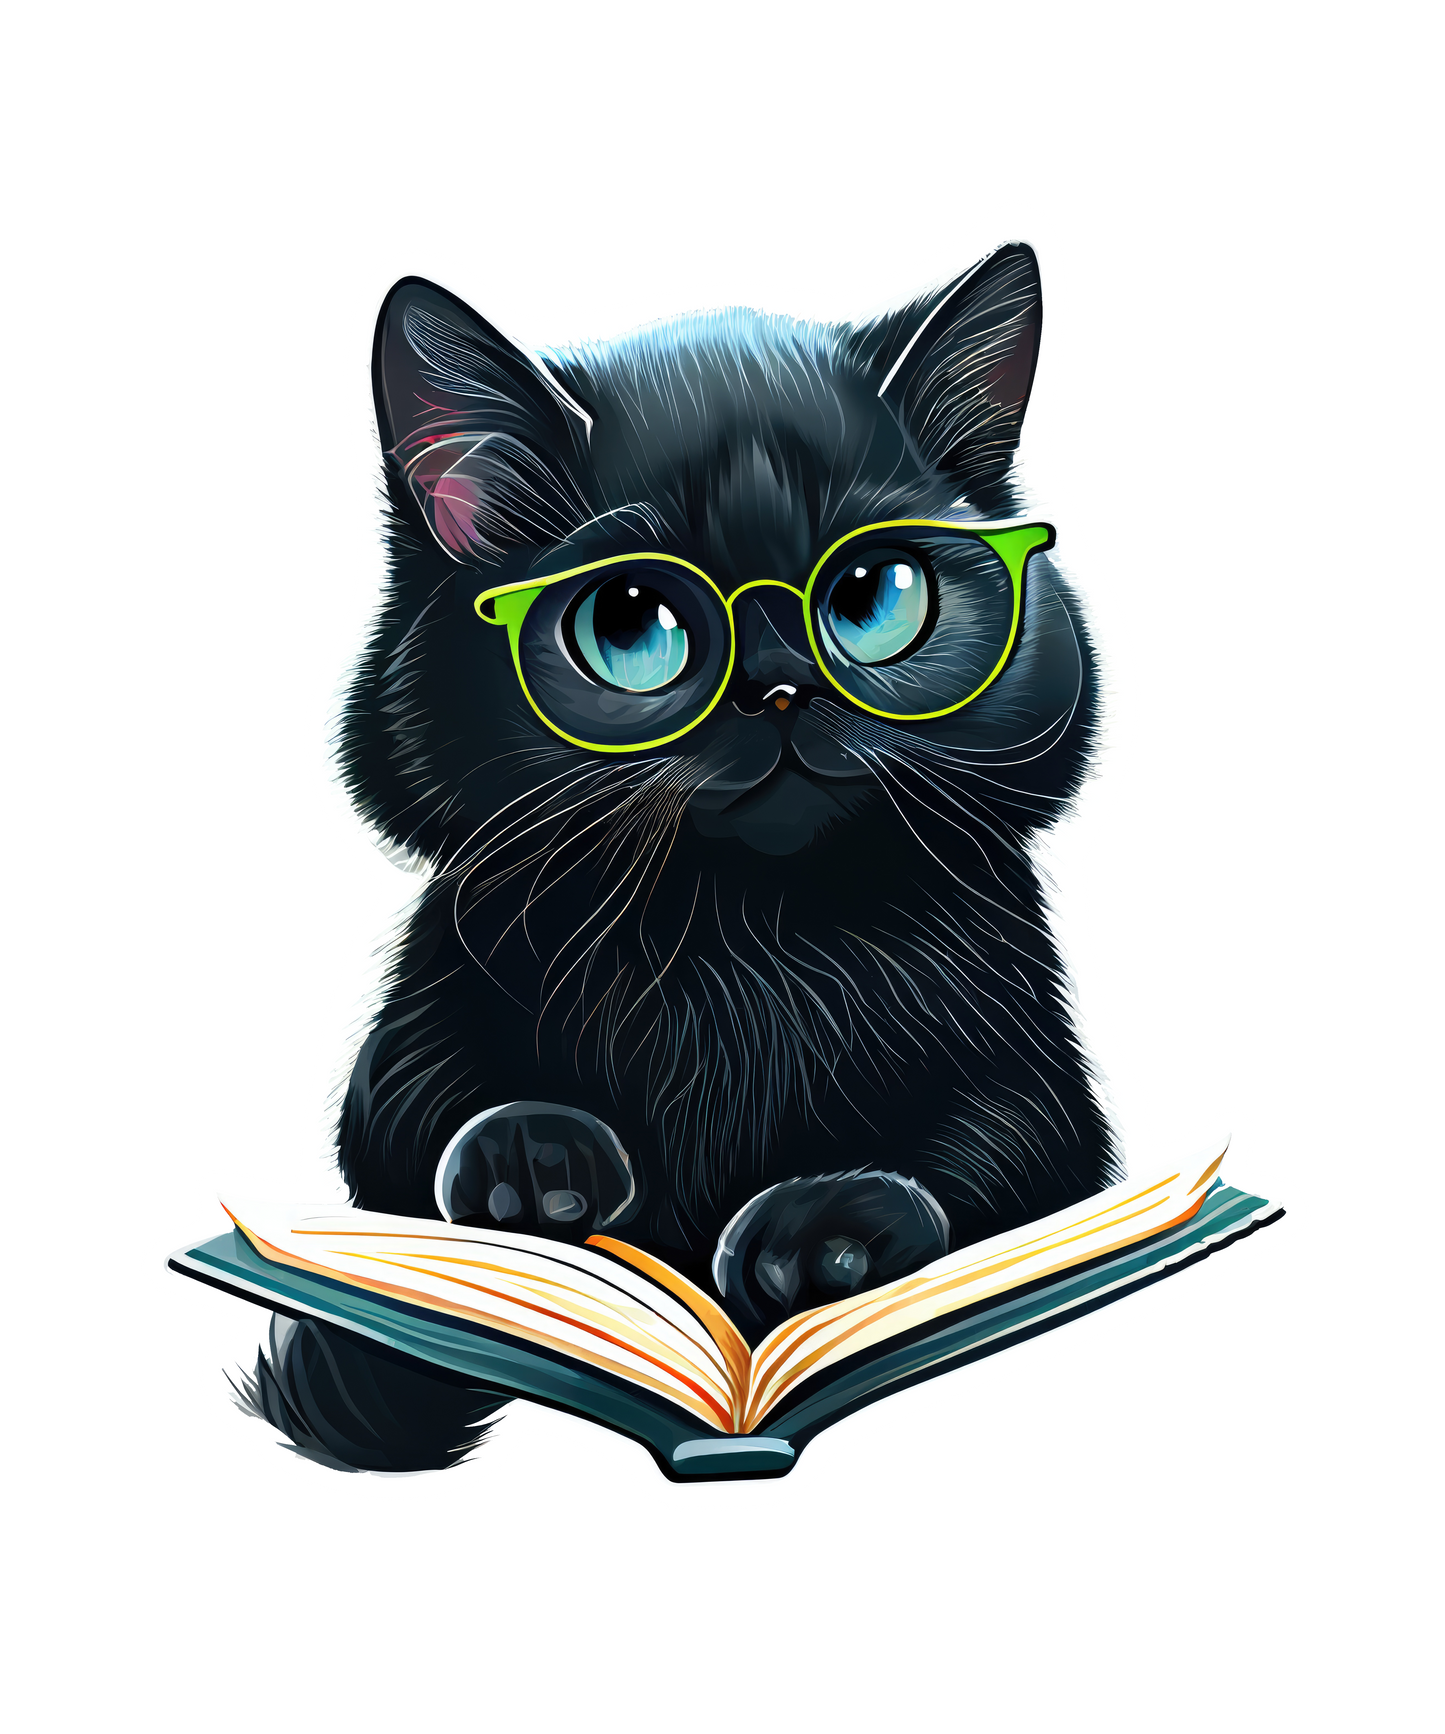 Stickers - Black Cat Reading a Book Sticker, Book Lovers' Stickers